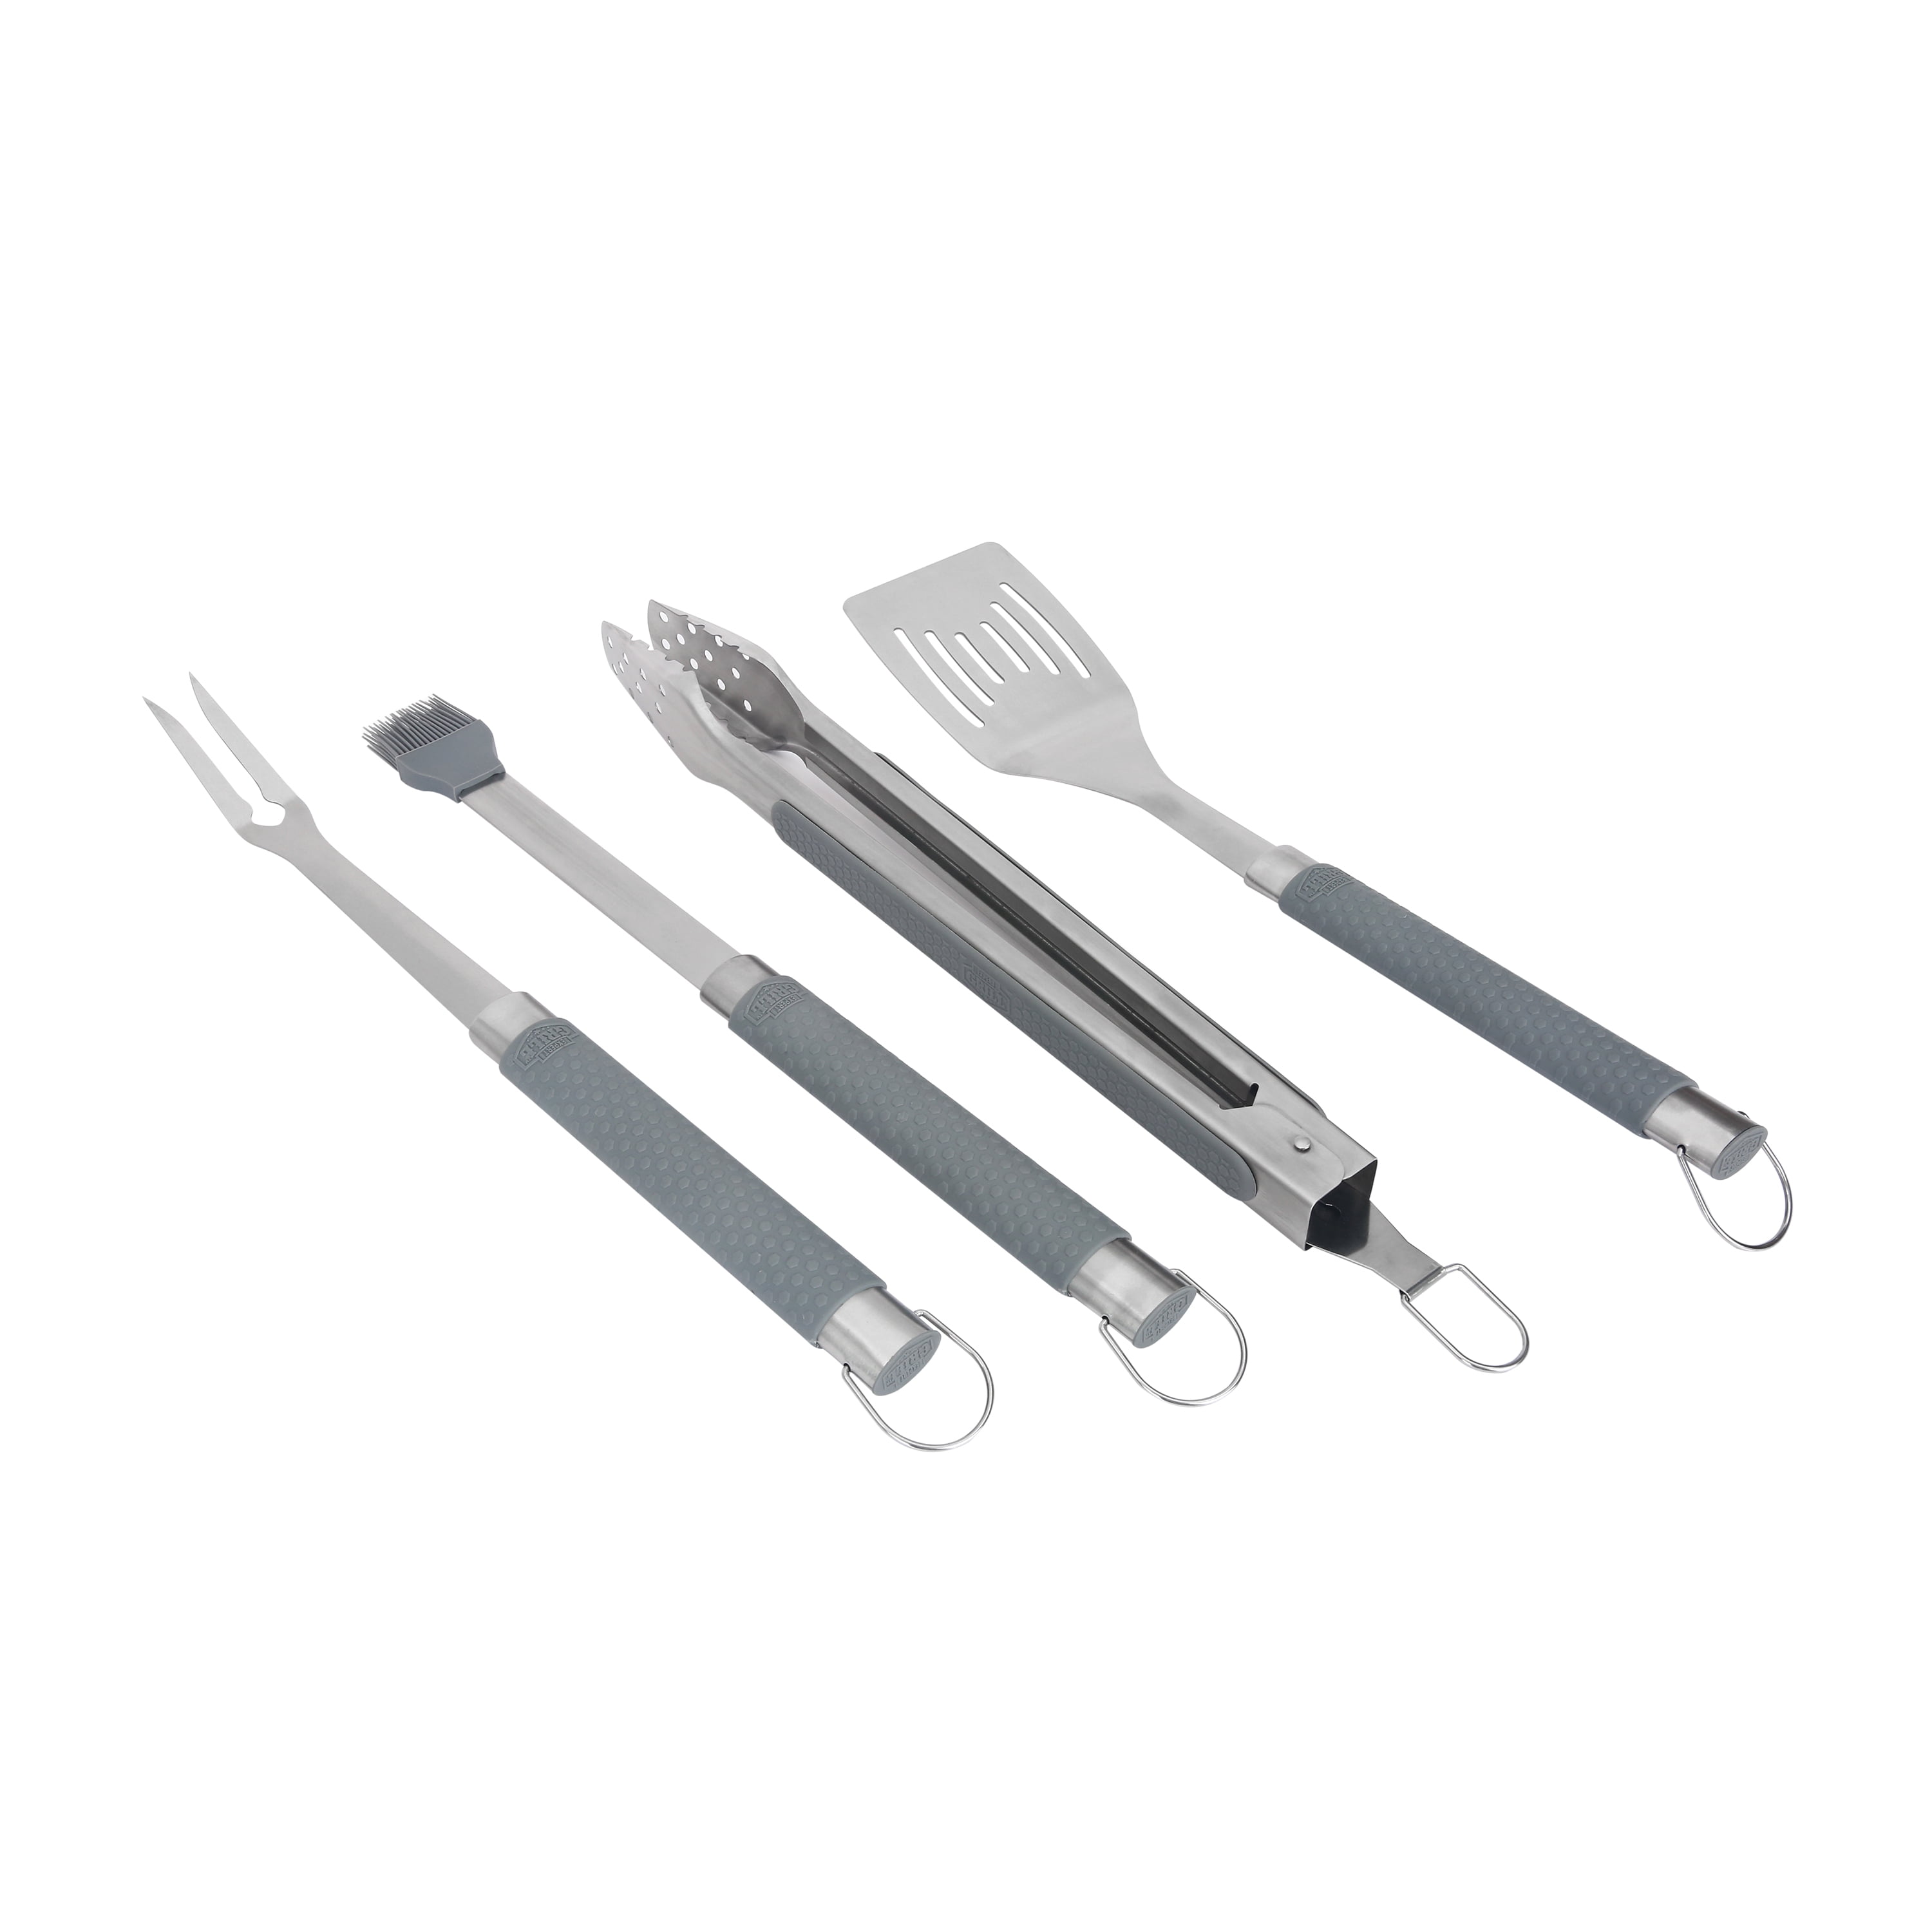 Stainless Steel 4-piece BBQ Tool Set with Soft Grip Handles